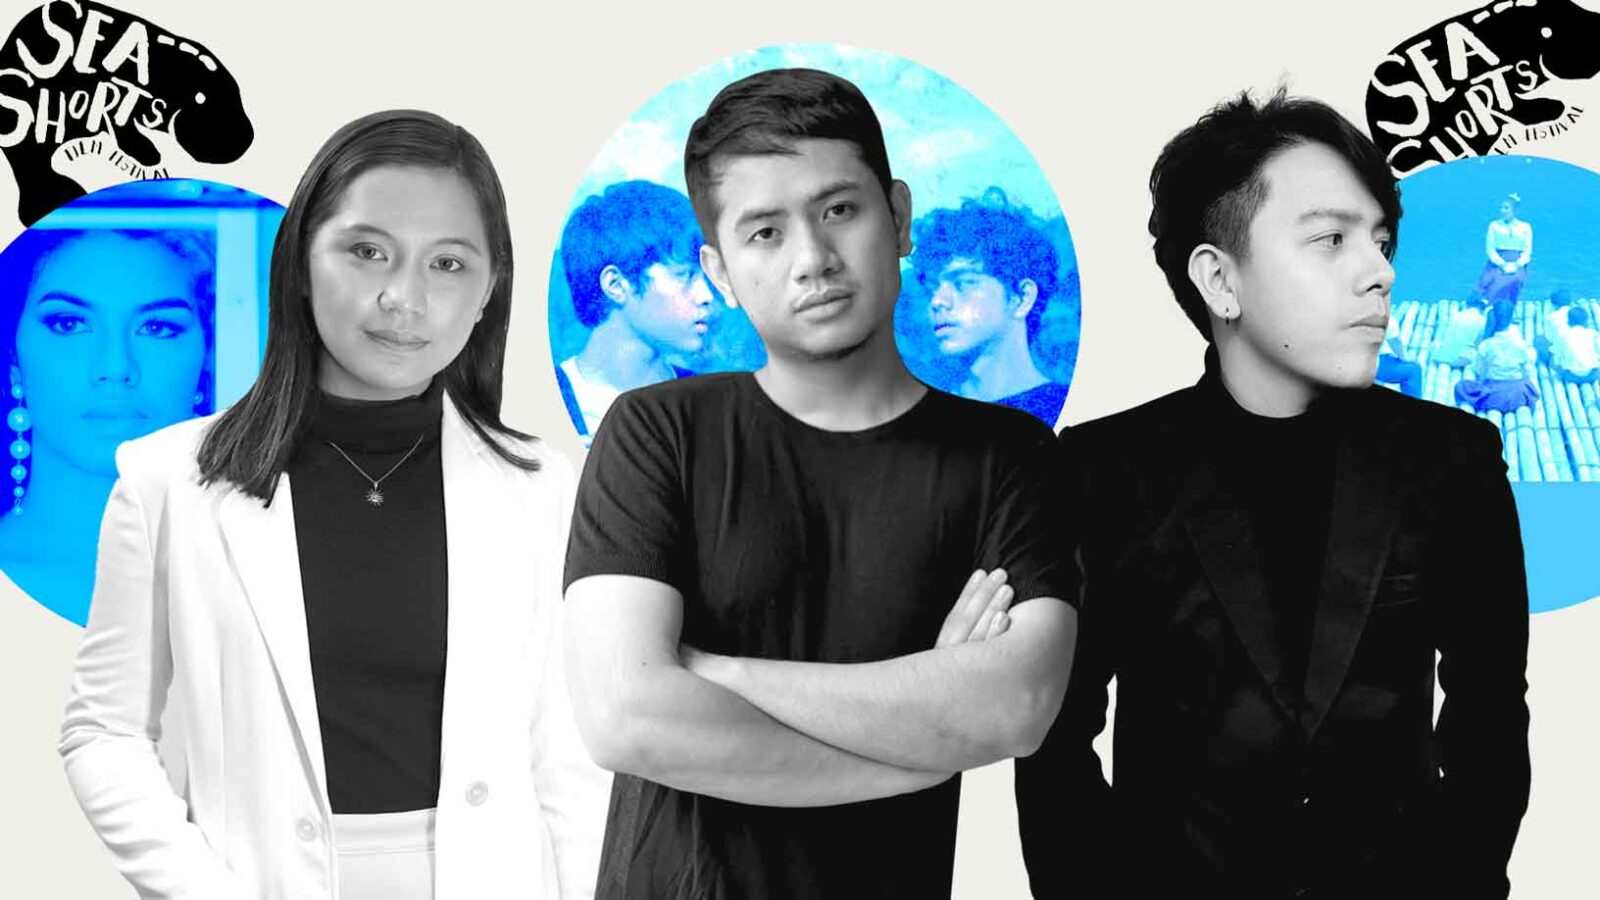 THESE FILIPINO FILMMAKERS ARE SET COMPETE AT THE SEASHORTS FILM FESTIVAL 2021